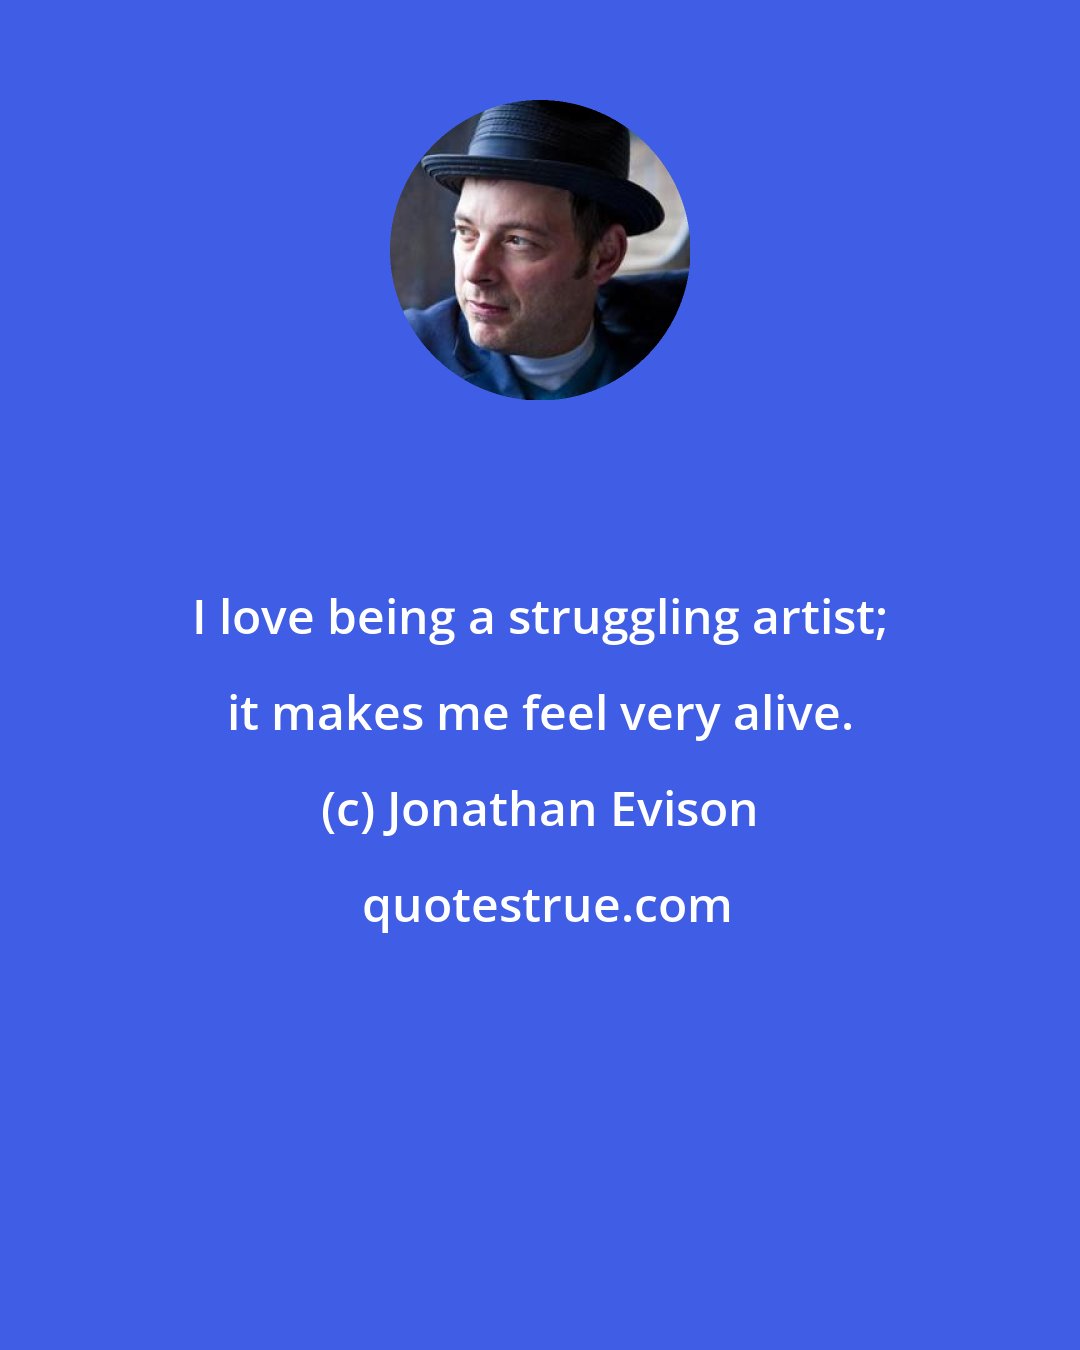 Jonathan Evison: I love being a struggling artist; it makes me feel very alive.